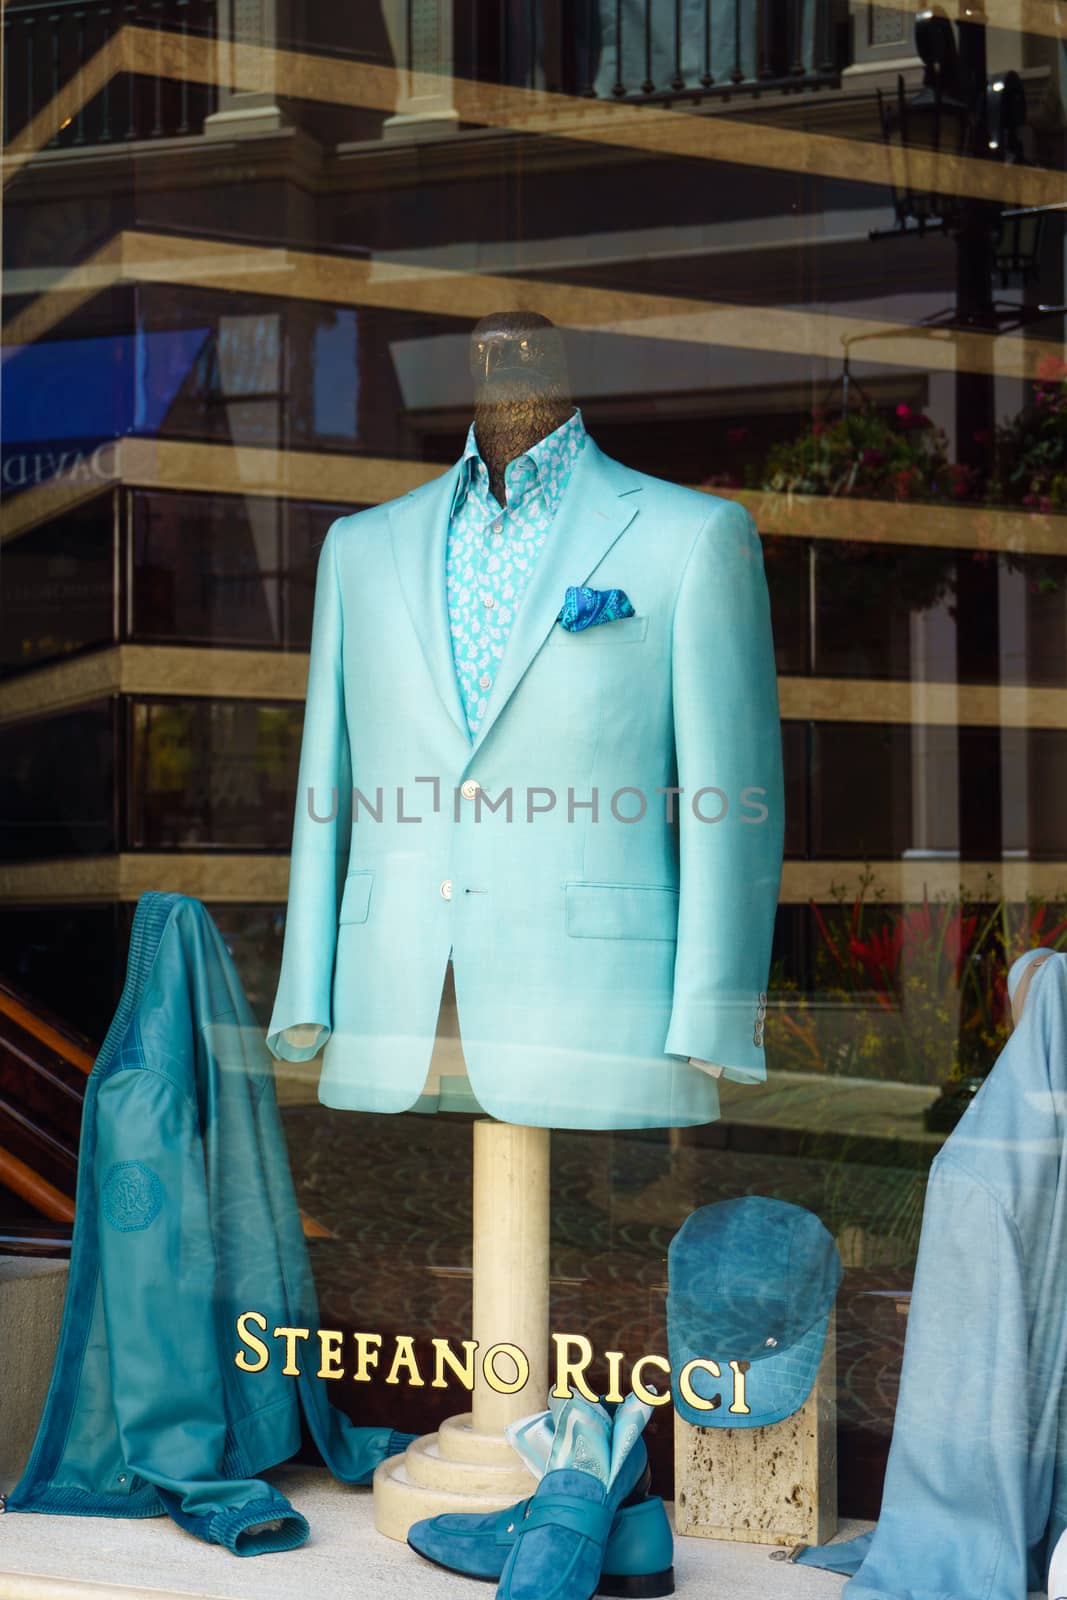 BEVERLY HILLS, CA/USA - MAY 10, 2015:  Stefano Ricci retail store exterior. Stefanno Ricci specializes in luxury mens clothing.